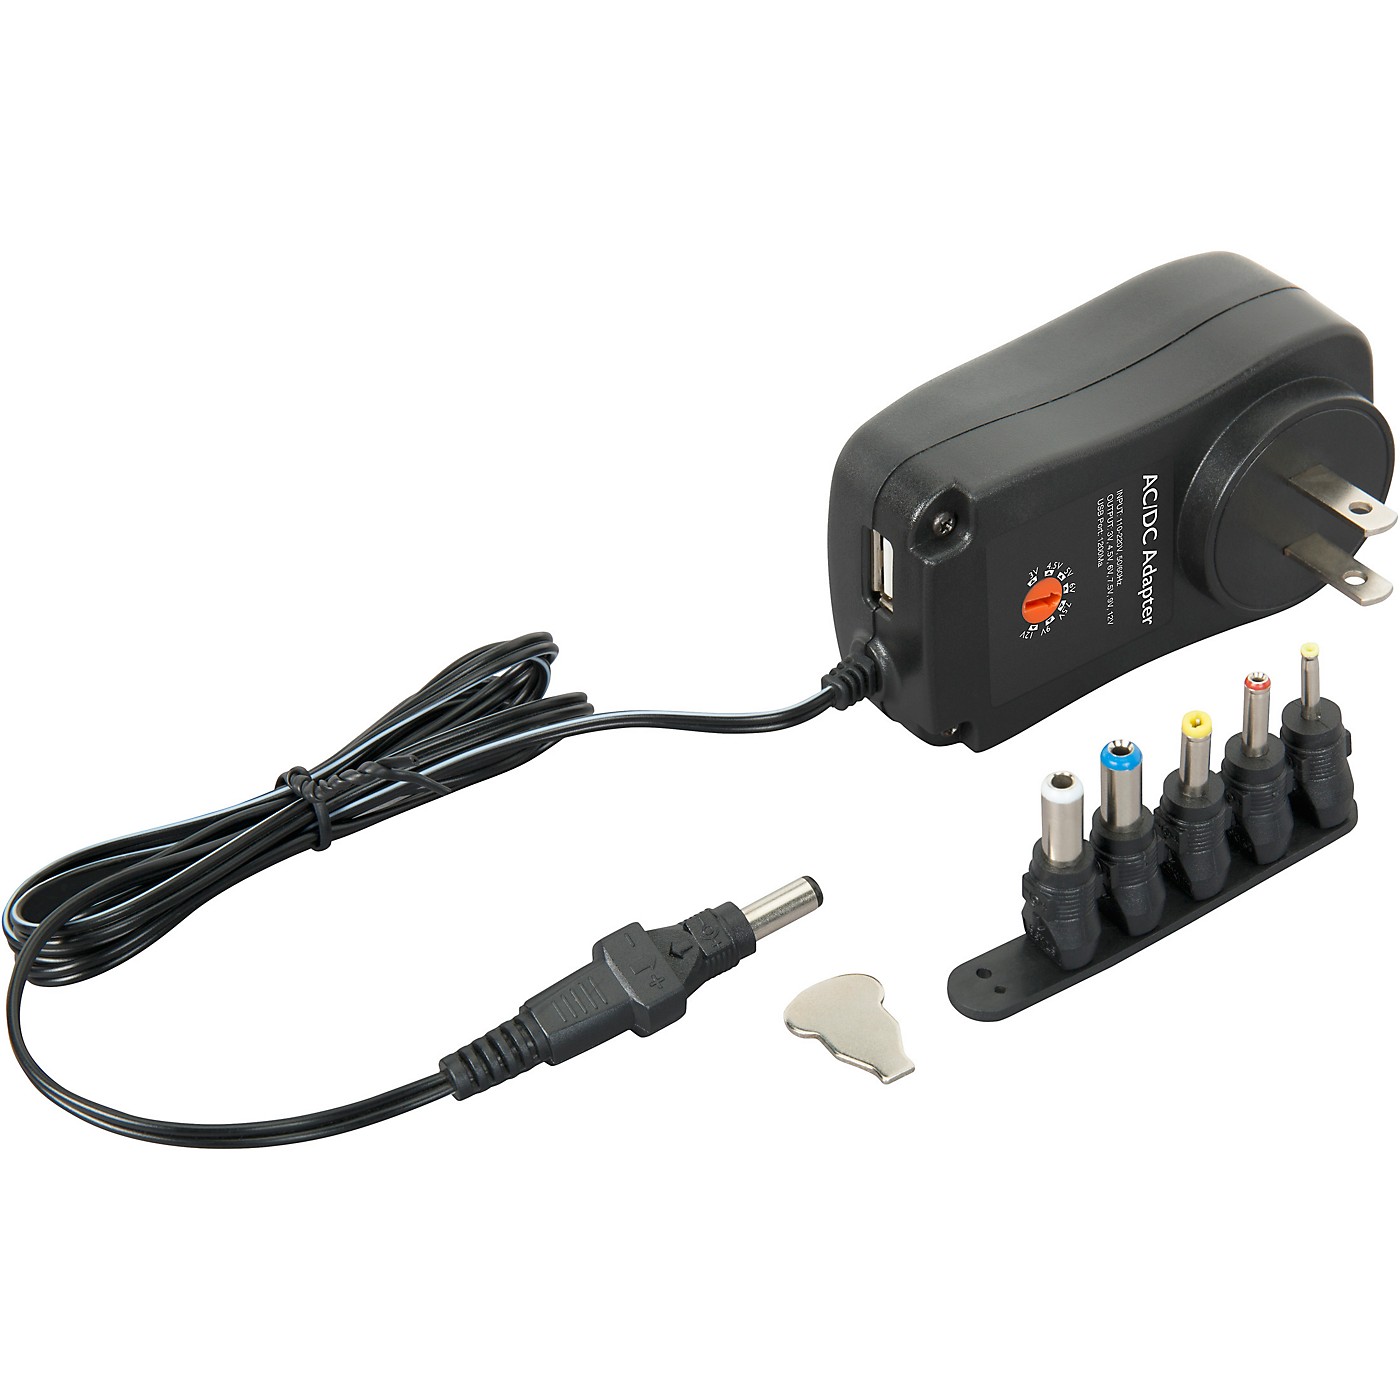 Livewire UXS Universal Multi-Voltage Power Supply with USB Port thumbnail